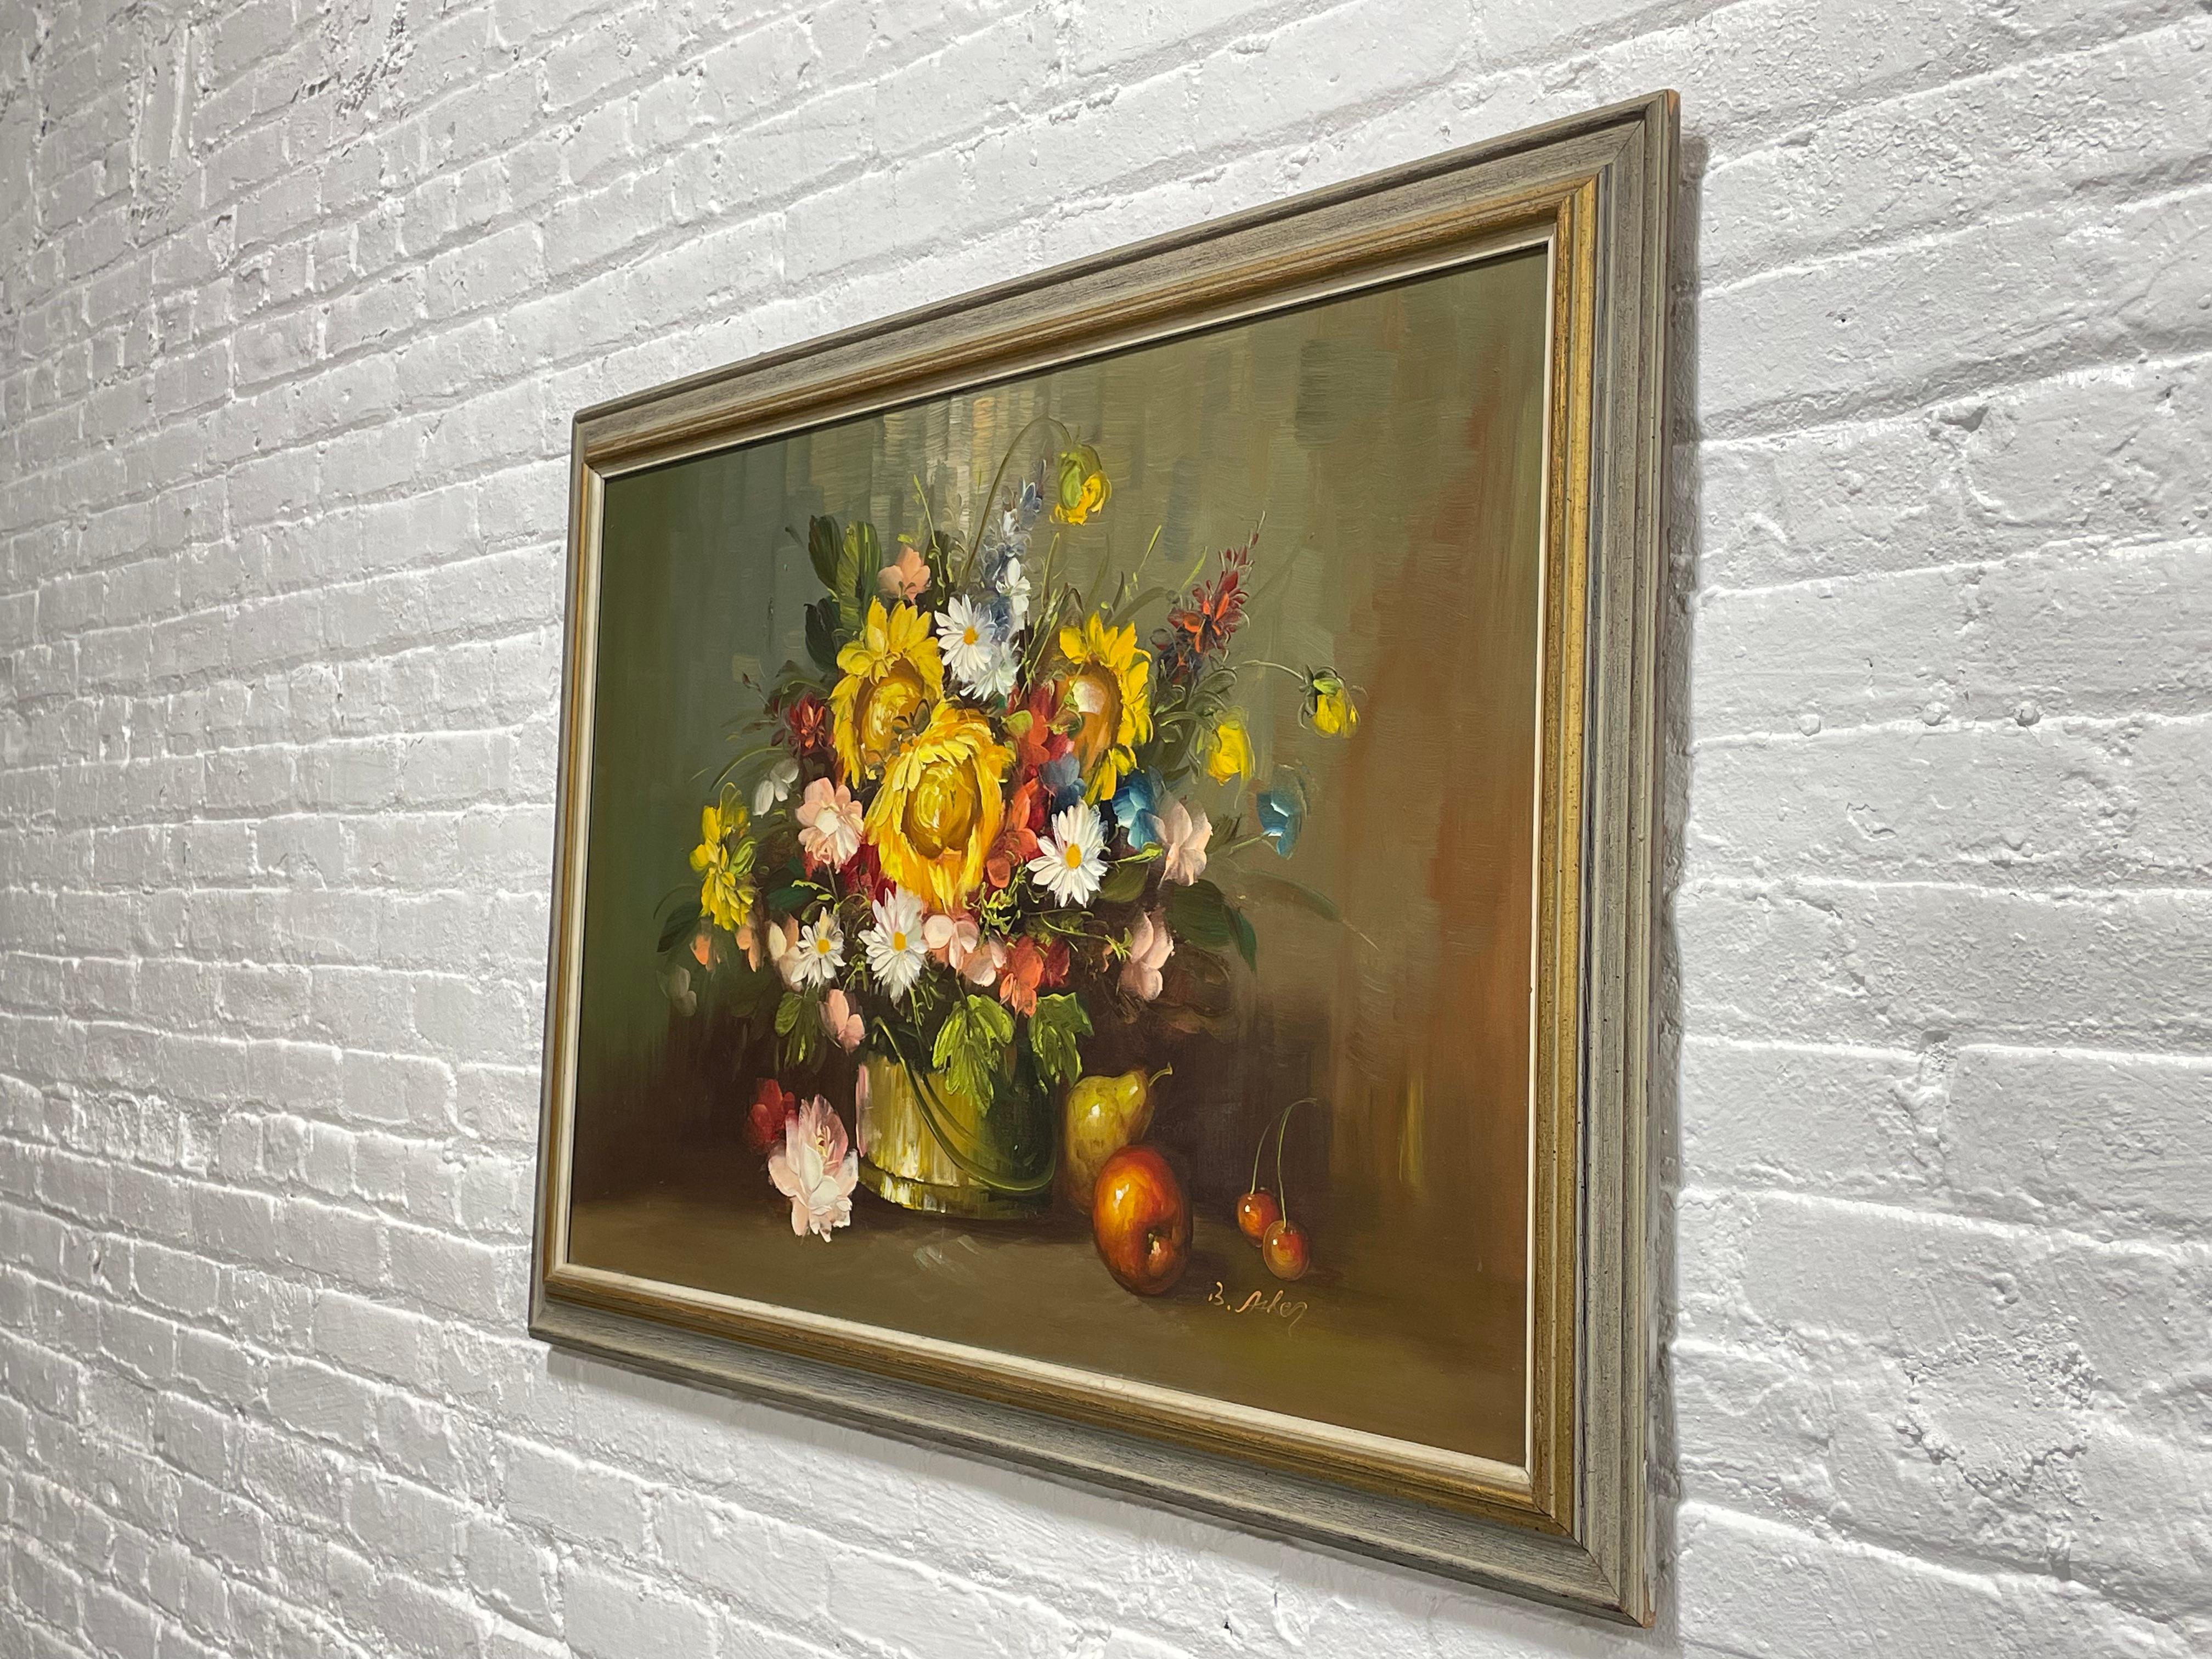 Mid-20th Century Original Oil Painting Still Life Bright Floral, c. 1960s For Sale